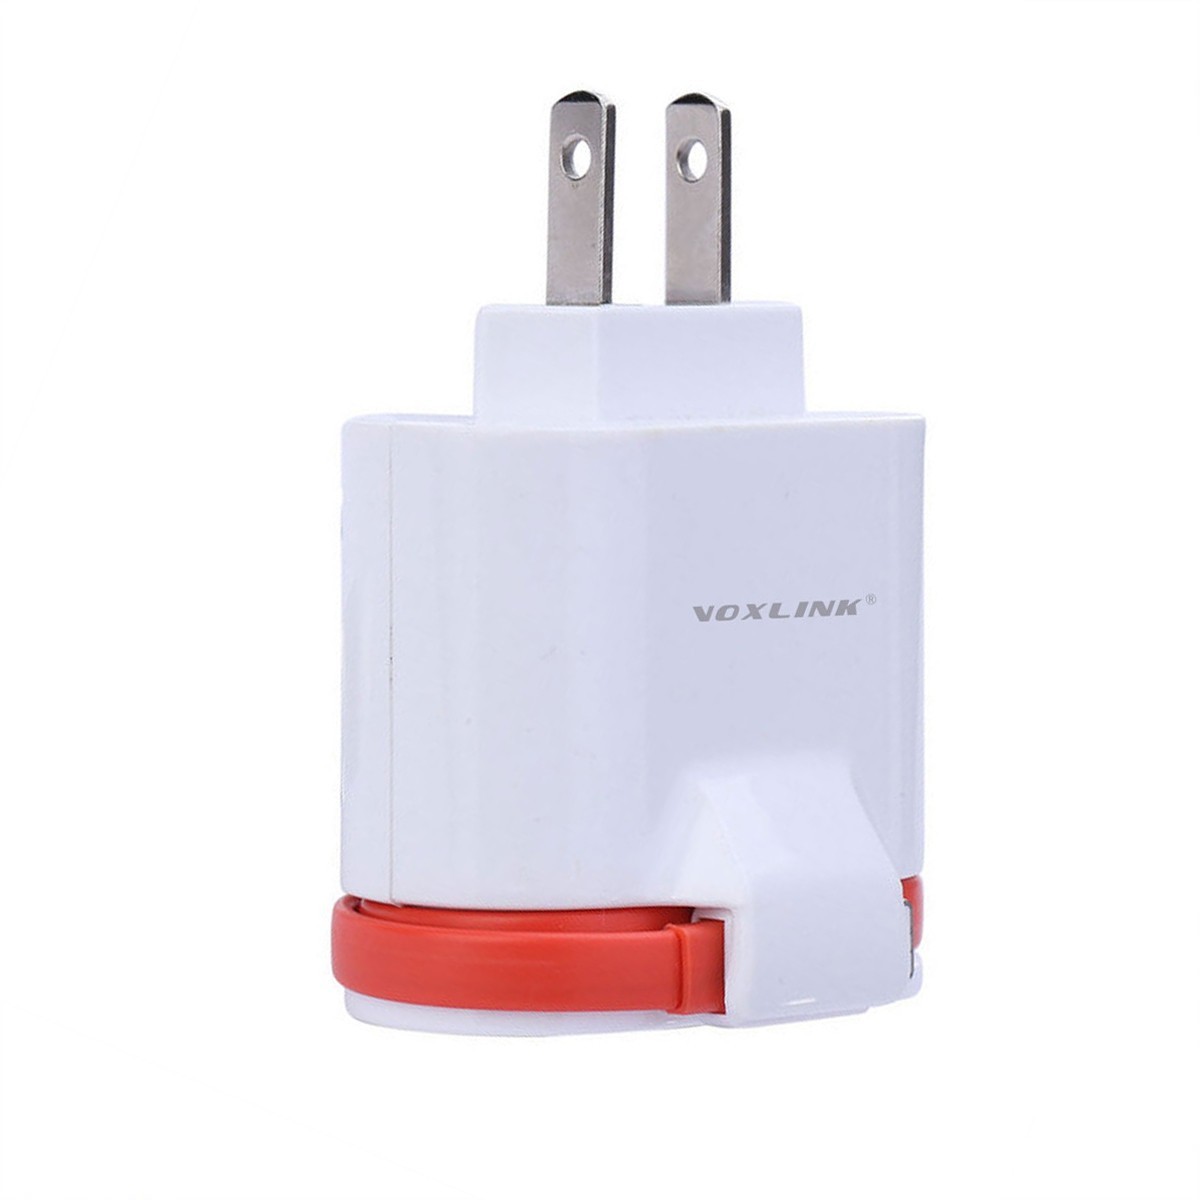 VOXLINK 5V 3.4A 2-Port Smart Travel USB Charger Adapter Portable Mobile Phone Charger for iPhone Samsung Xiaomi-iPhone white US